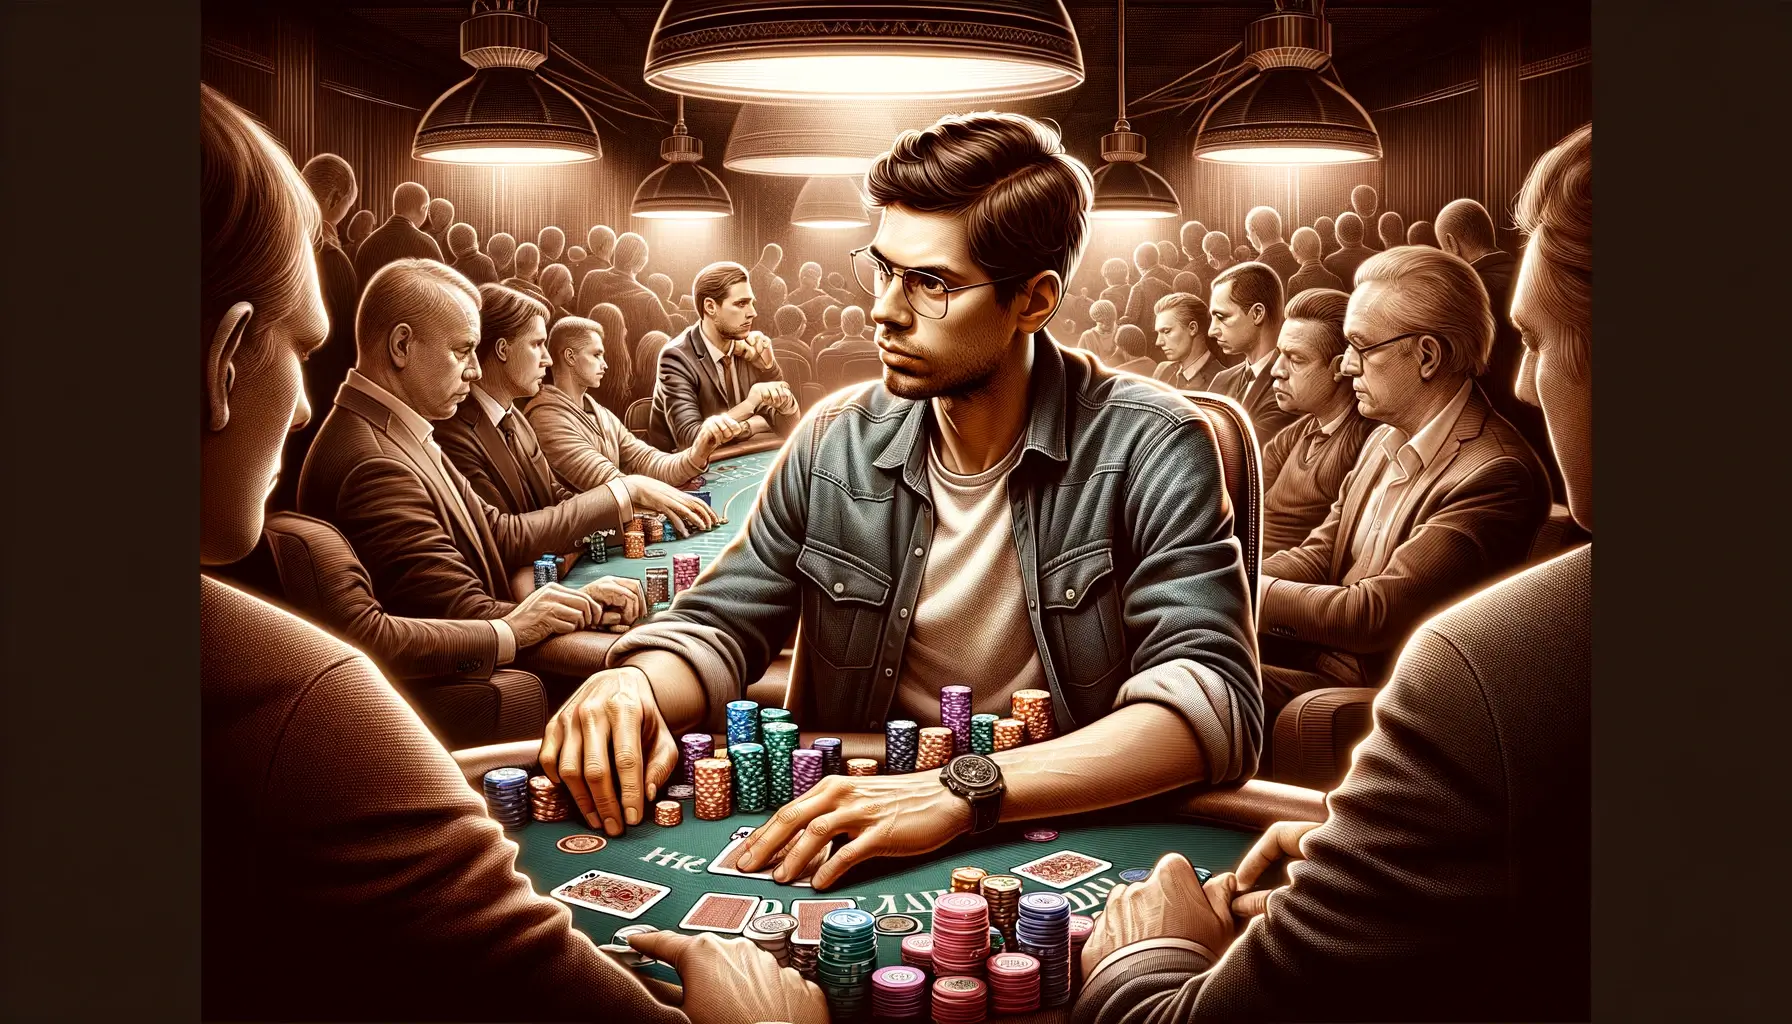 A detailed digital illustration of Joonas Karhu sitting at a poker table during his early poker career. He's surrounded by poker chips and cards, strategizing his next move while analyzing opponents across the table.